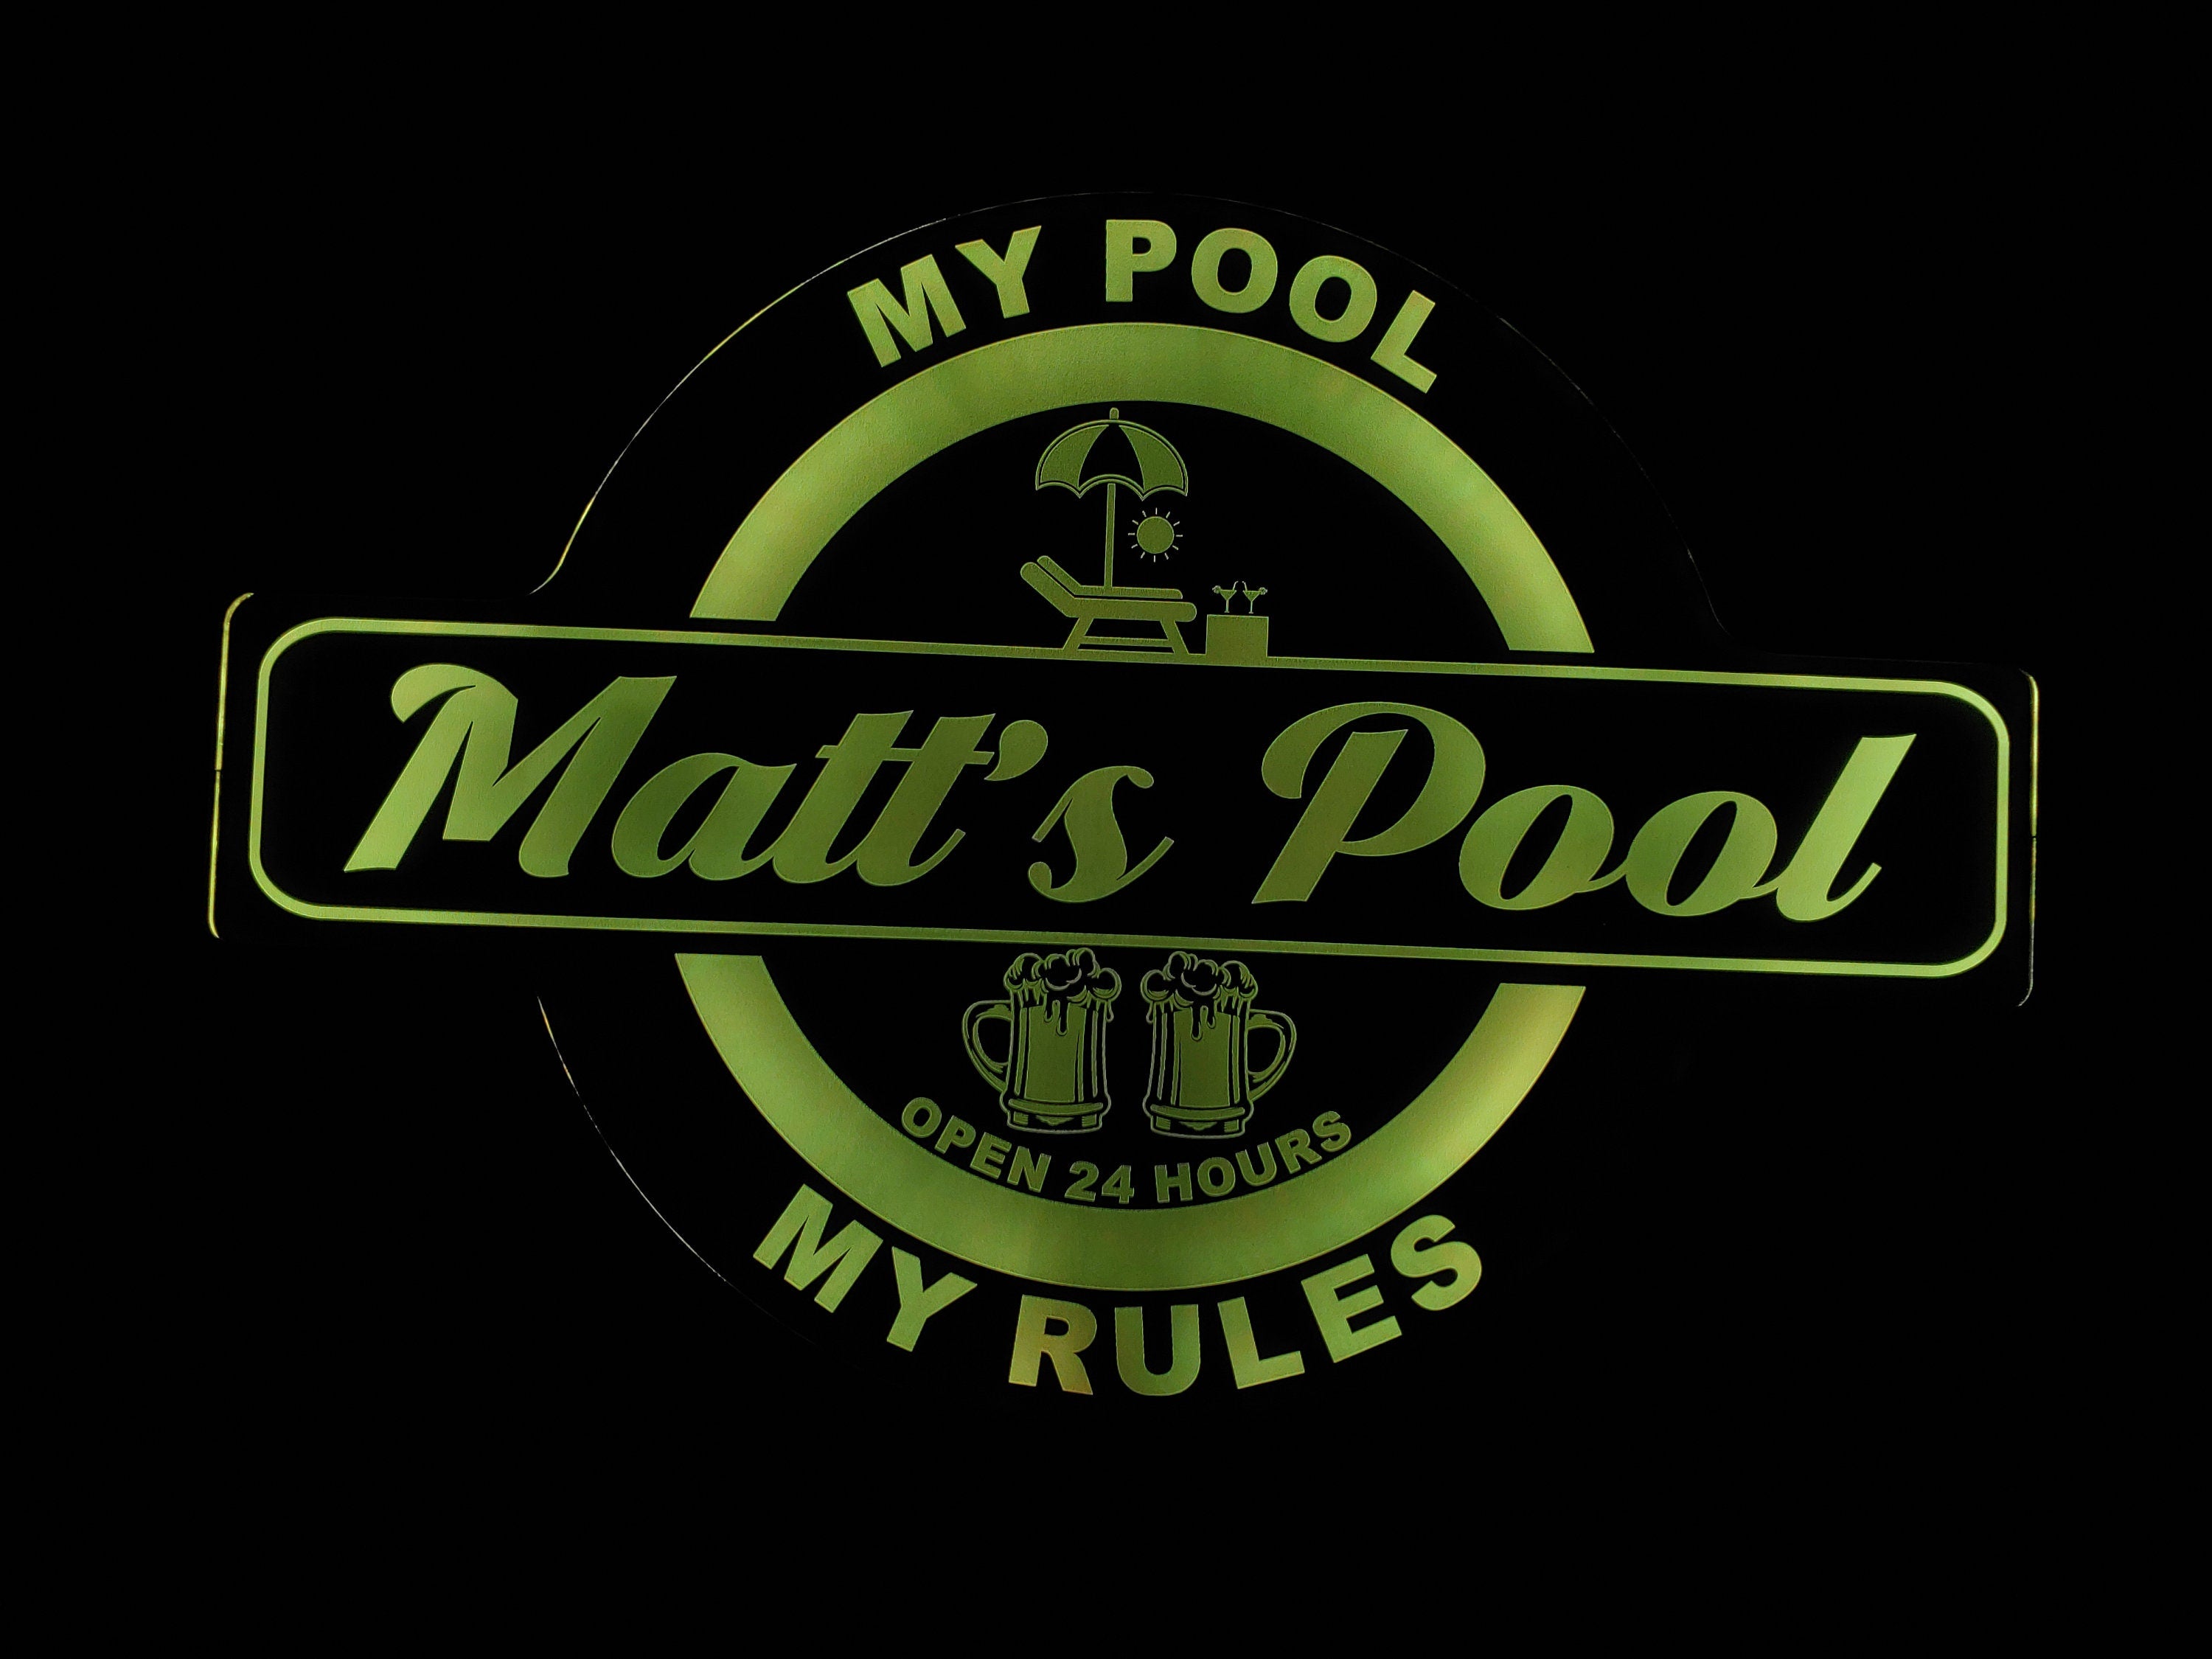 Custom Pool Sign, Barn, Garden, Shed, Gazebo or Shack Led Wall Sign Neon Like - Color Changing Remote Control - 4 Sizes Free Shipping